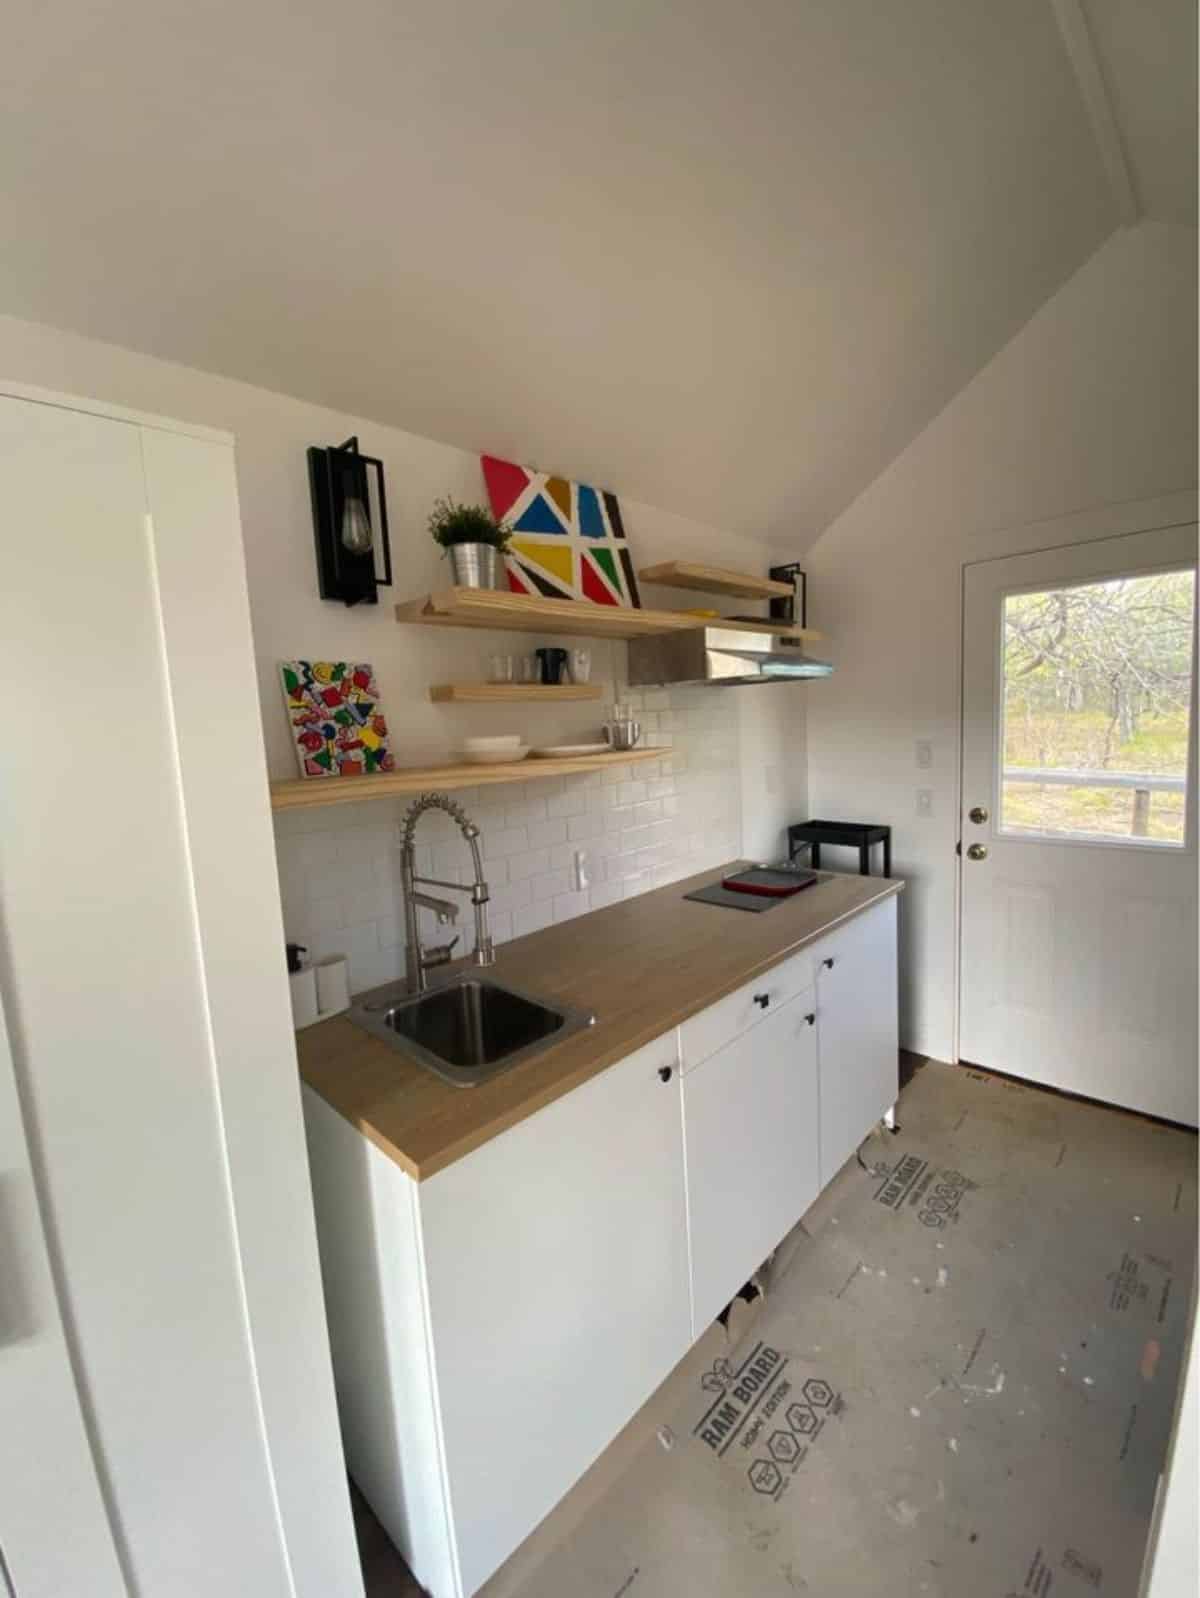 Well organized kitchen area of Tiny Home on Skids